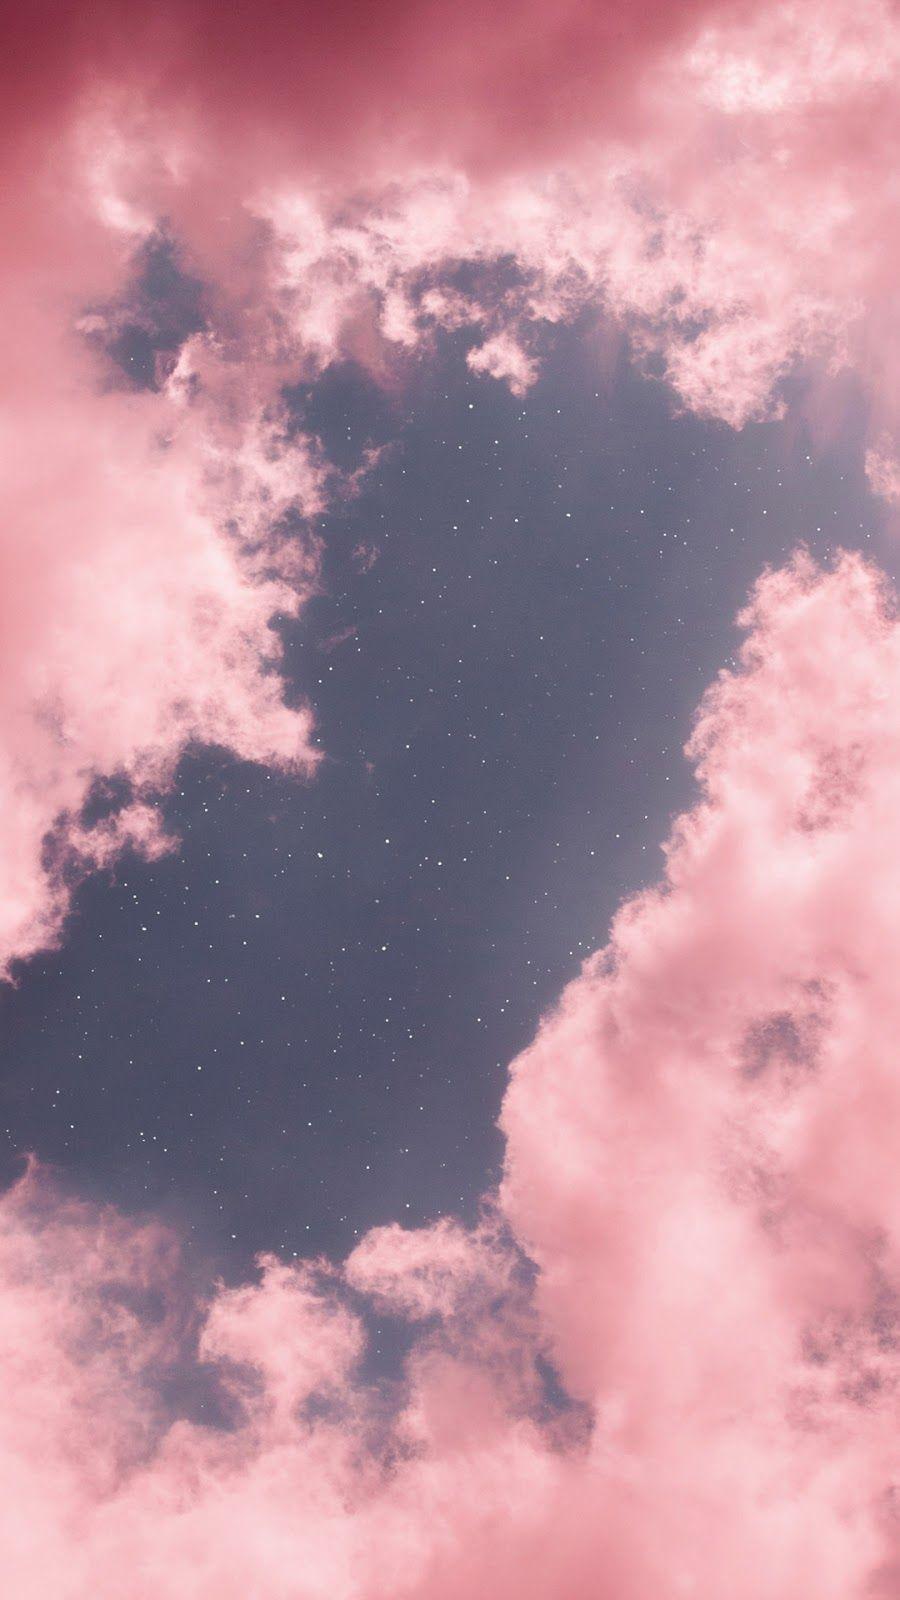 Pink Clouds Aesthetic Wallpapers Wallpaper Cave Choose from a curated selection of aesthetic wallpapers for your mobile and desktop screens. pink clouds aesthetic wallpapers